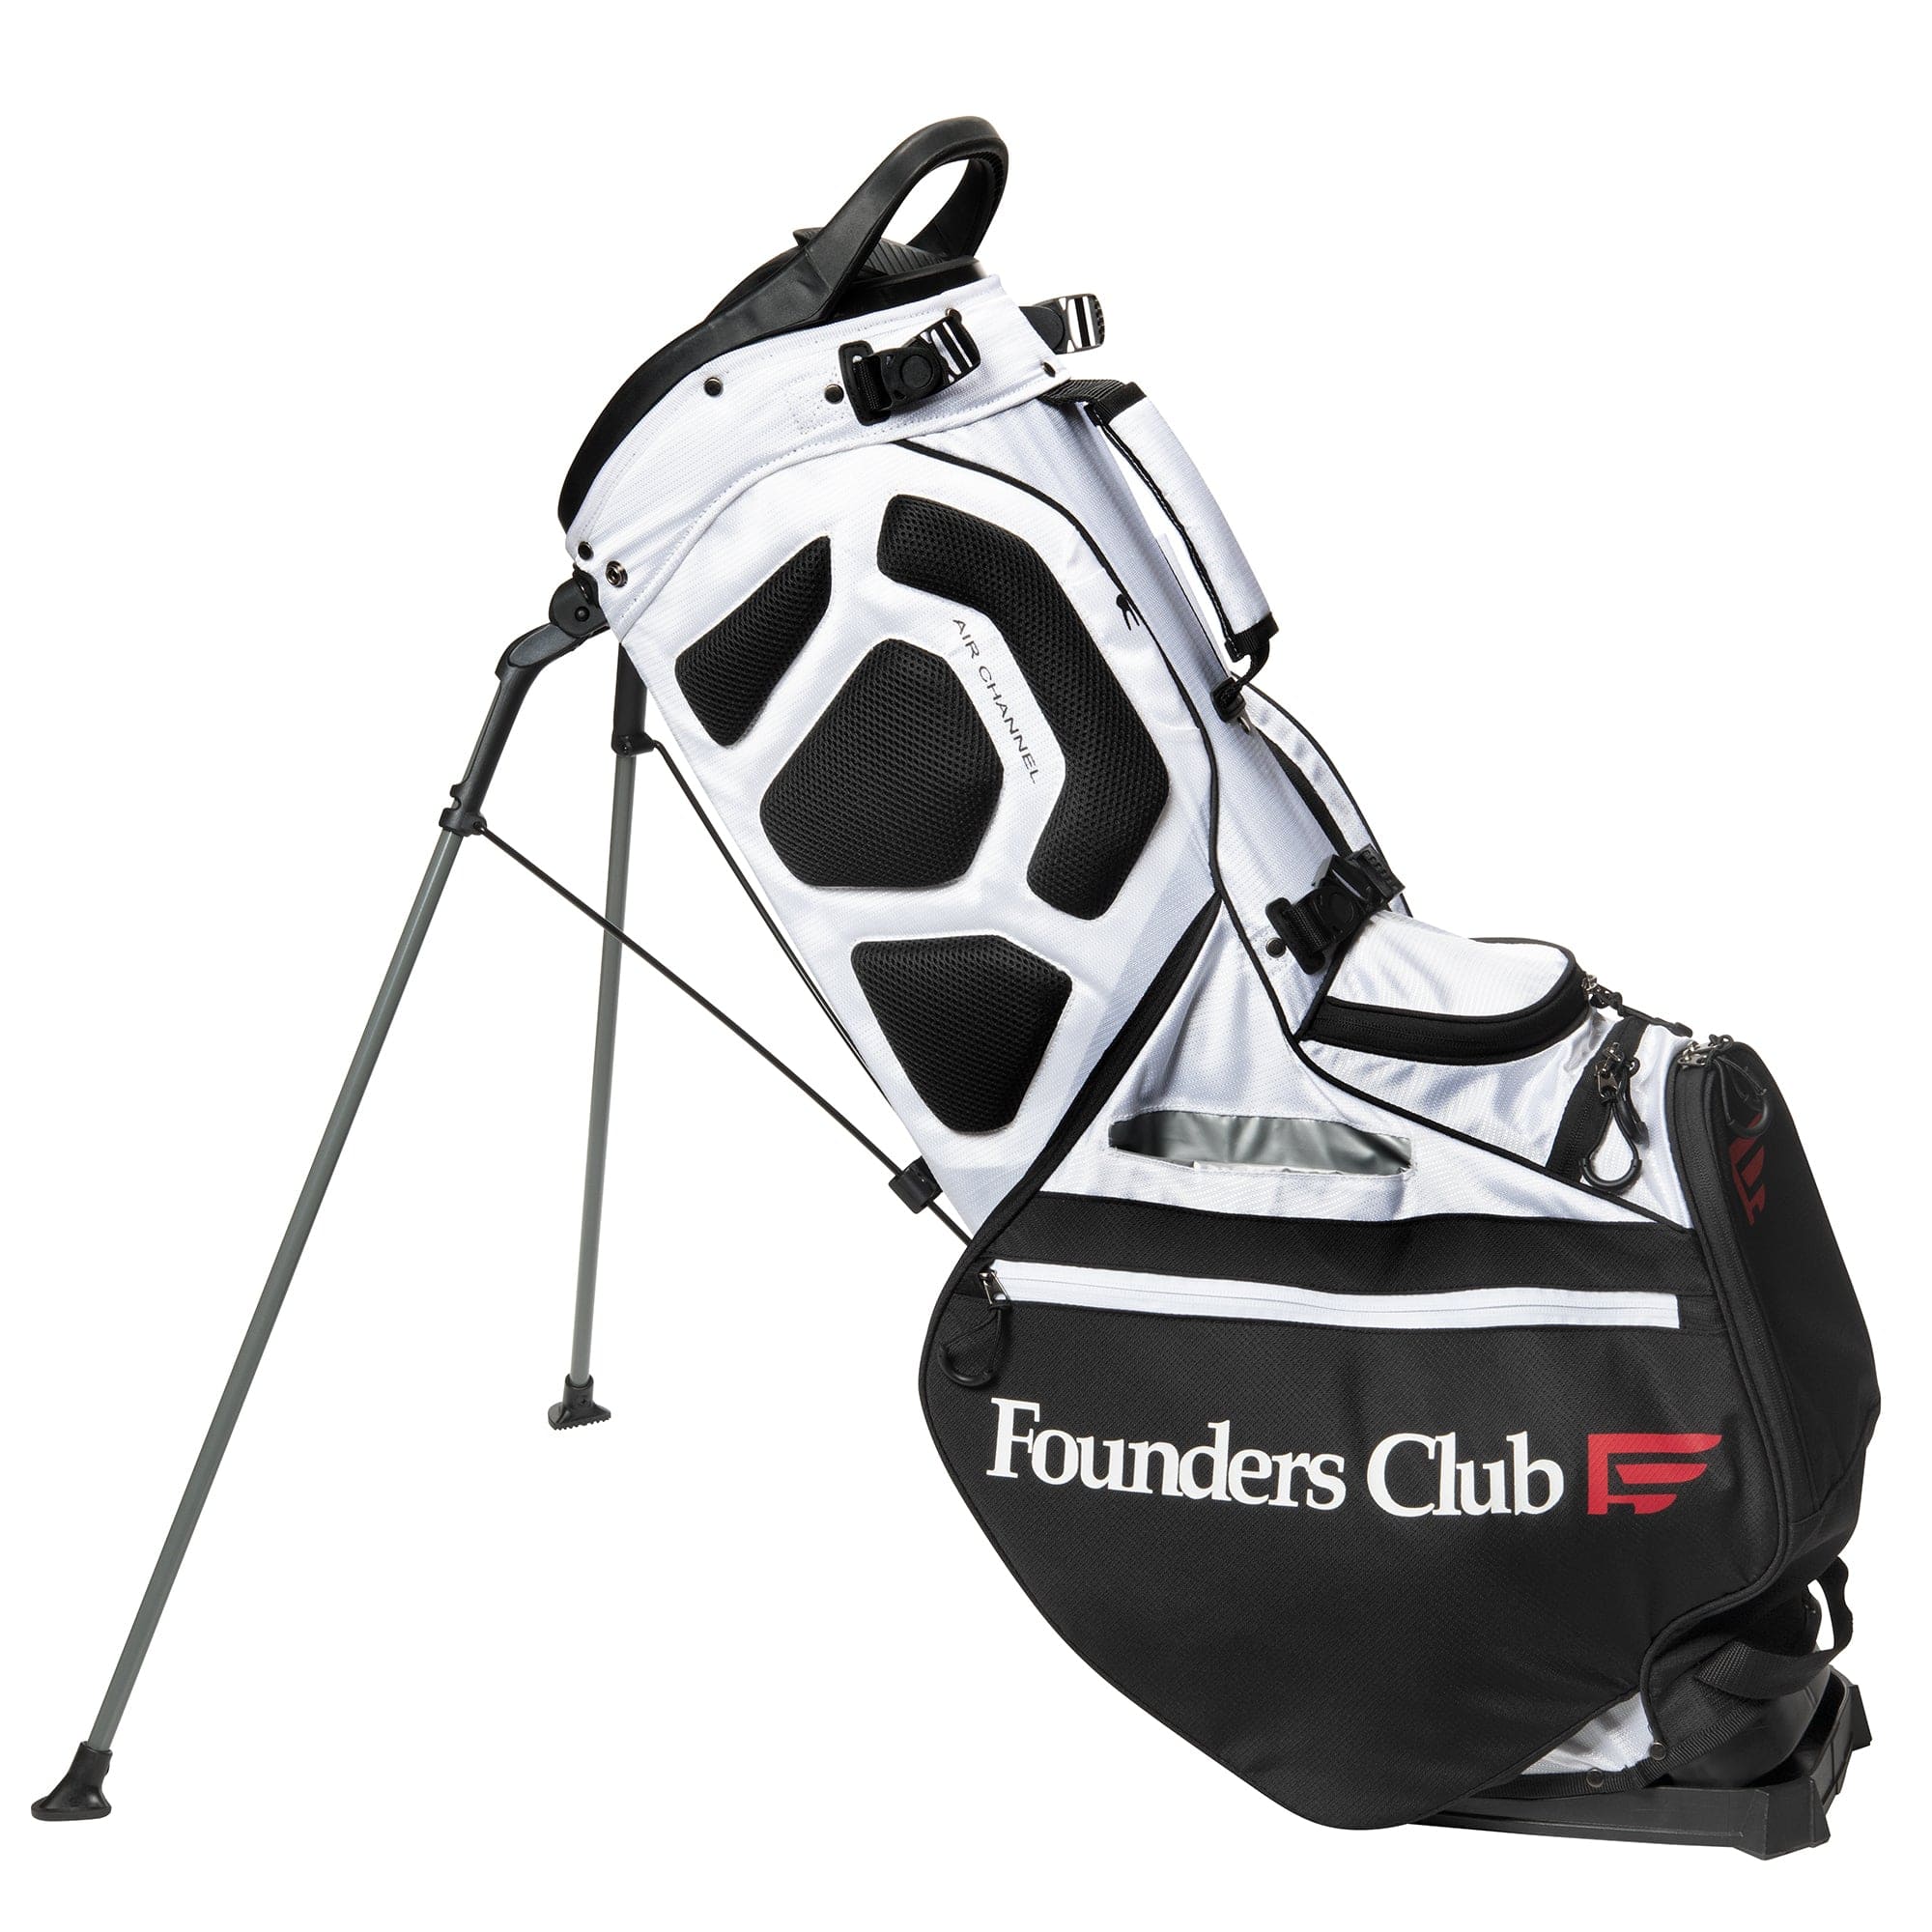 Founders Club TG2 Complete Womens Golf Set - Right-Handed